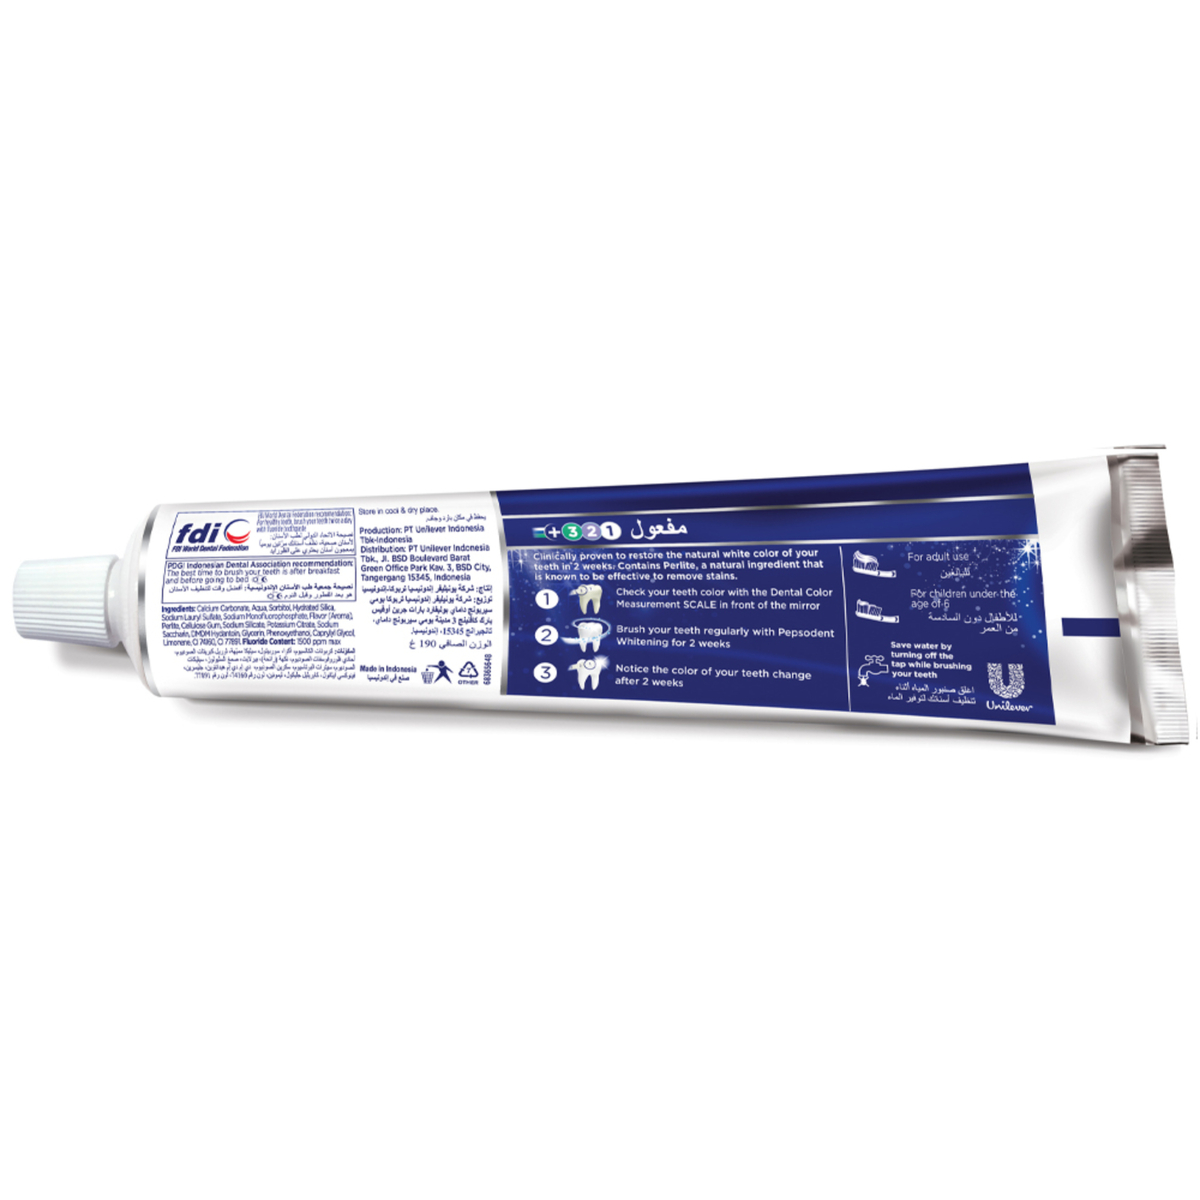 Pepsodent Action 123+ Whitening Toothpaste 190 g